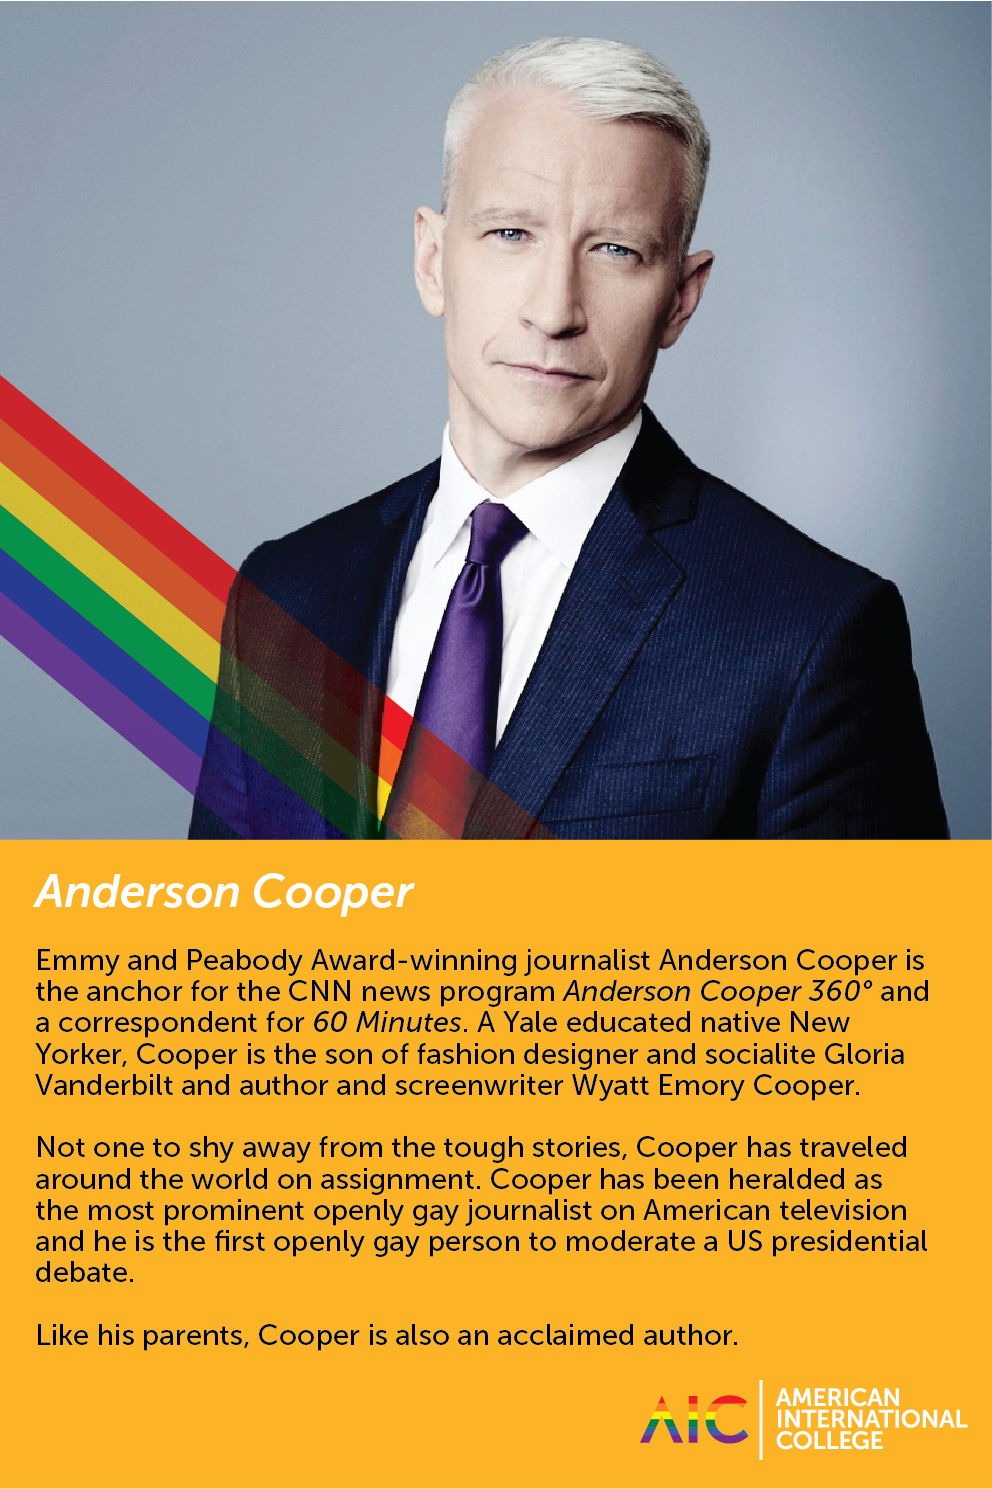 American International College will  celebrate leaders in the LGBT movement, Anderson Cooper among them, every day throughout the month of June on the College's social media platforms.